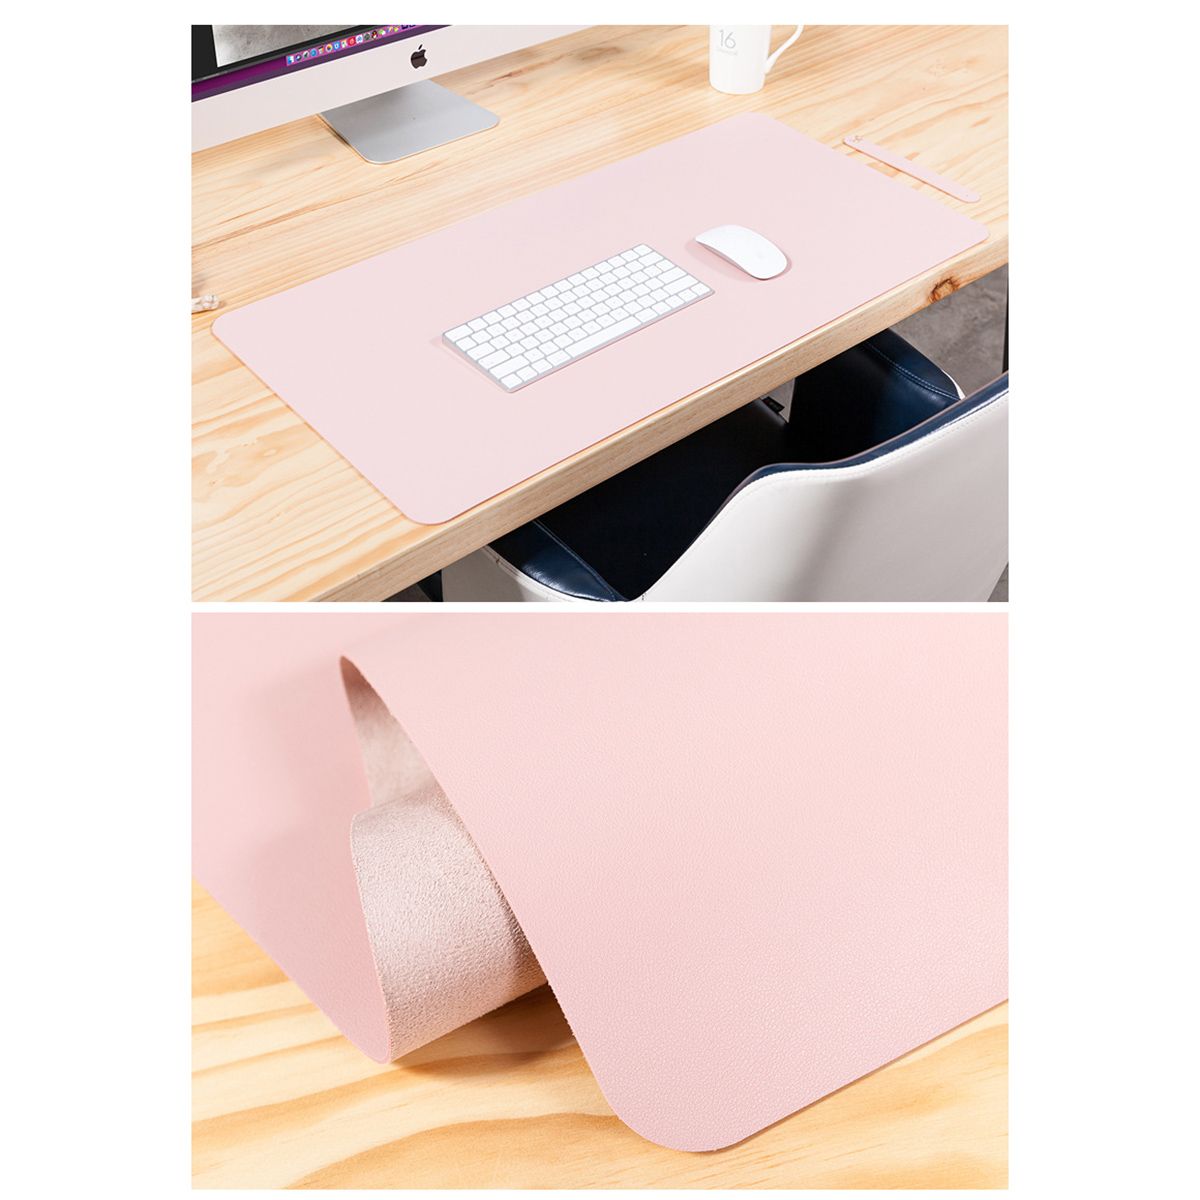 Double-side-Large-Mouse-Pad-PU-Leather-Non-slip-Gaming-Keyboard-Pad-Table-Desktop-Protective-Mat-for-1740580